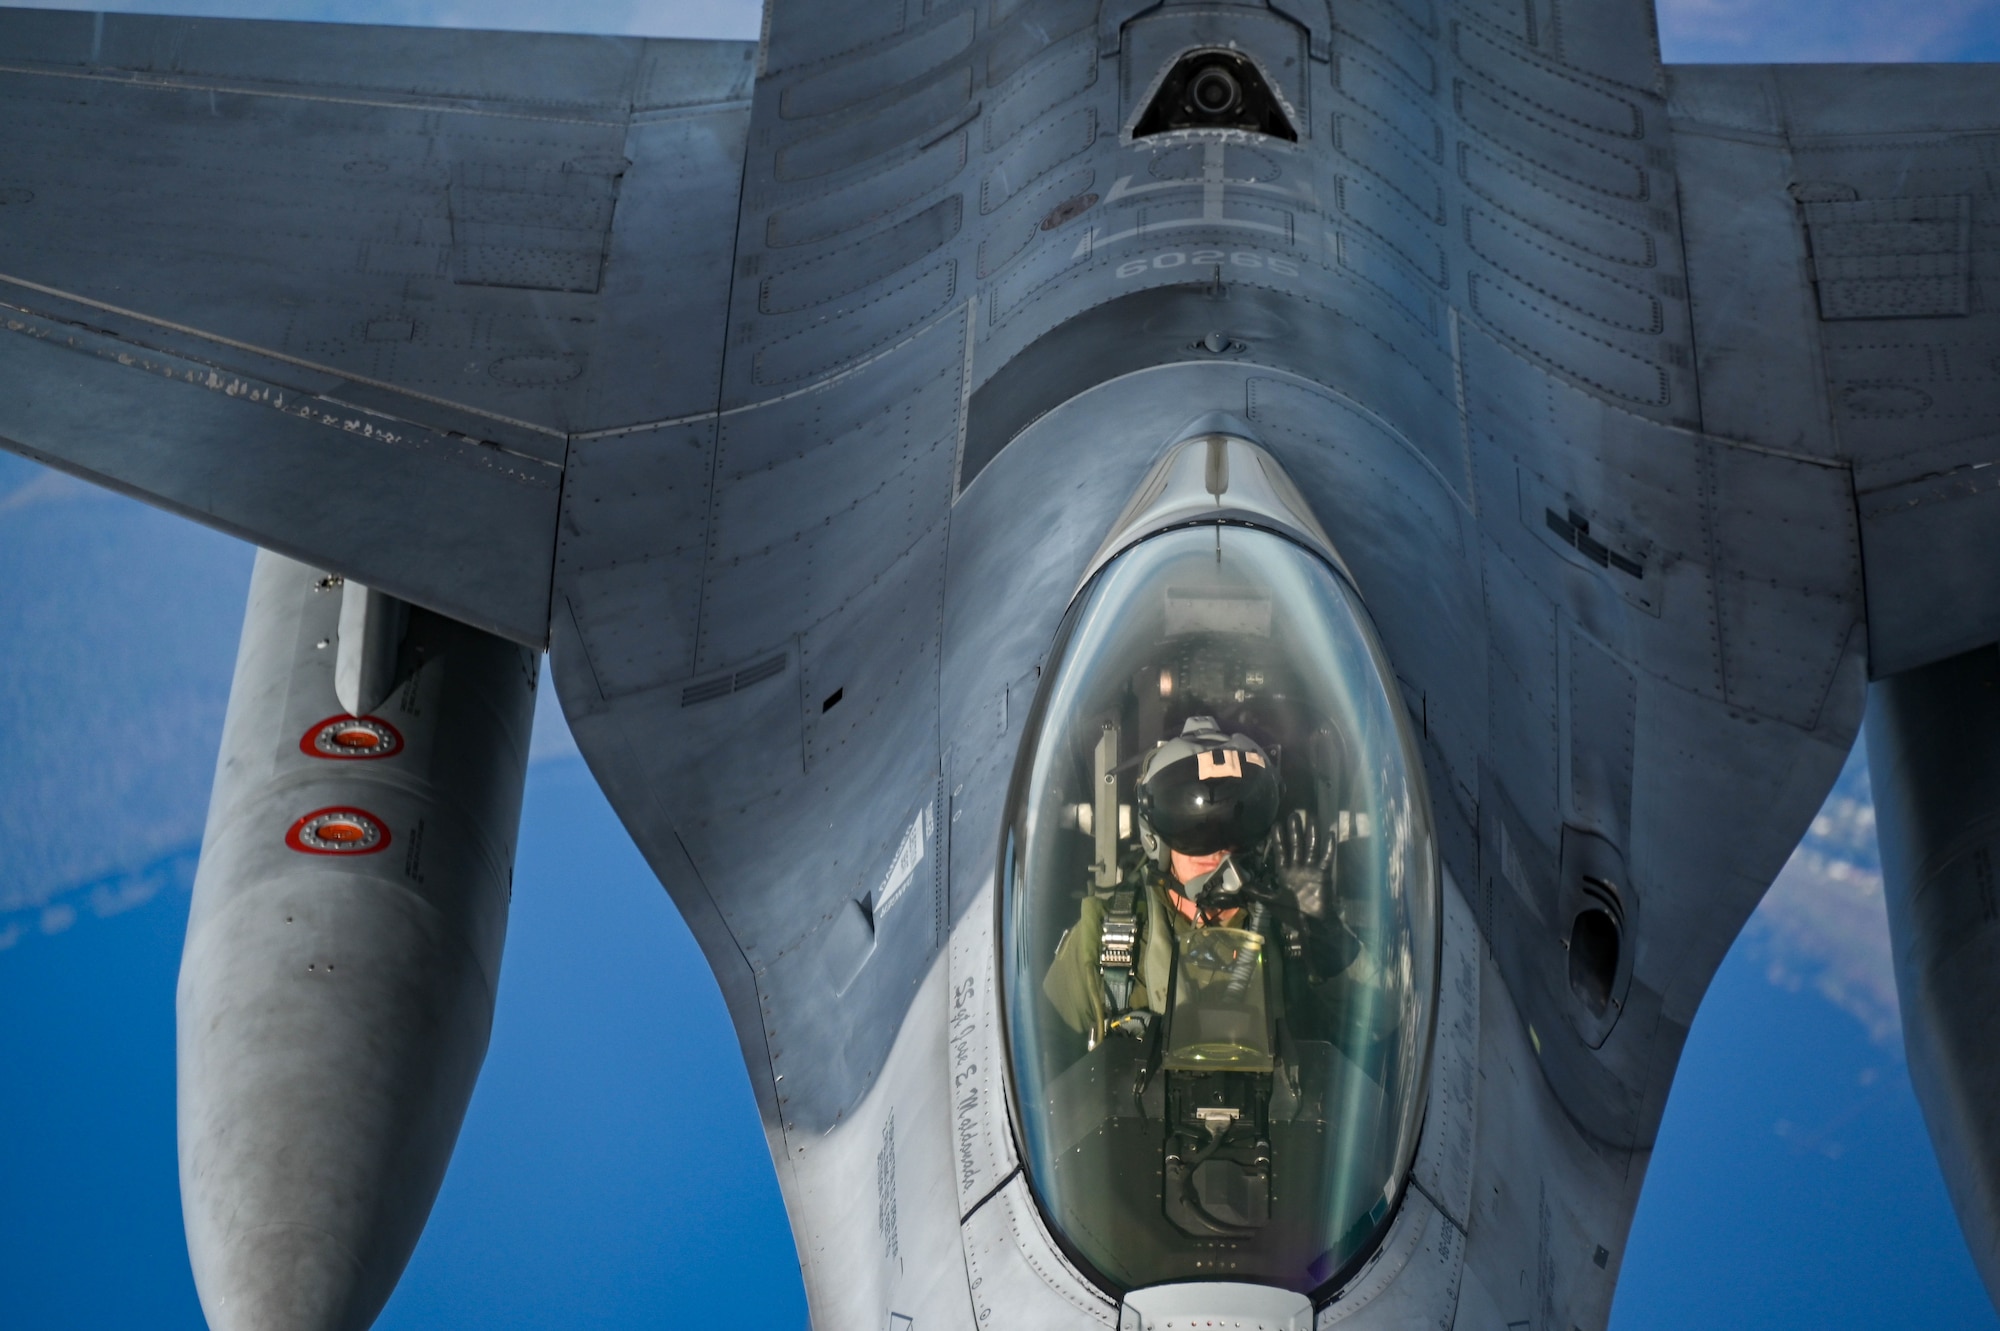 F-16s from the 93rd Fighter Squadron at Homestead Air Reserve Base, Florida, practice aerial refueling with a KC-135 Stratotanker from the 465th Air Refueling Squadron at Tinker Air Force Base, Oklahoma, Jan 27, 2020. This business effort training mission ensured that aircrew on multiple platforms received the necessary upgrade and competency training required to remain fully mission capable. (U.S. Air Force photo by Senior Airman Mary Begy)